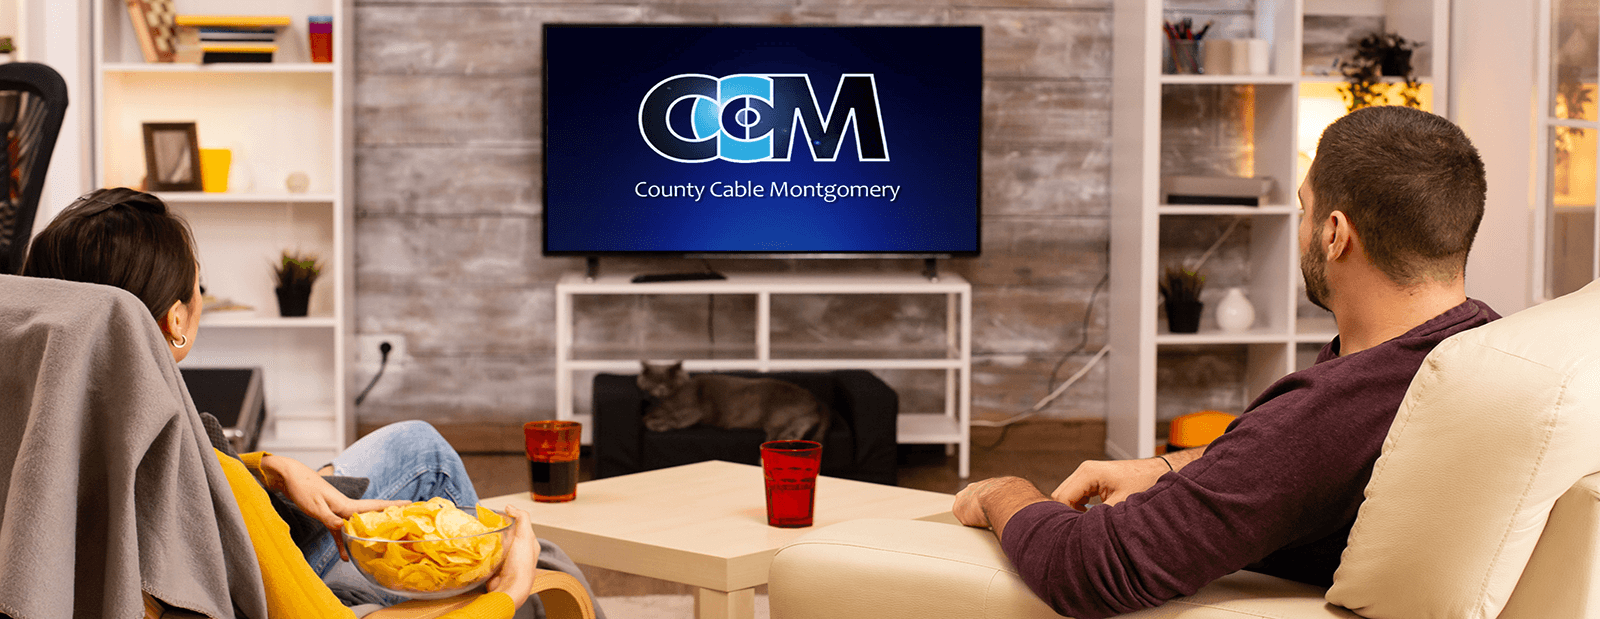 County Cable Montgomery - Image of family watching tv